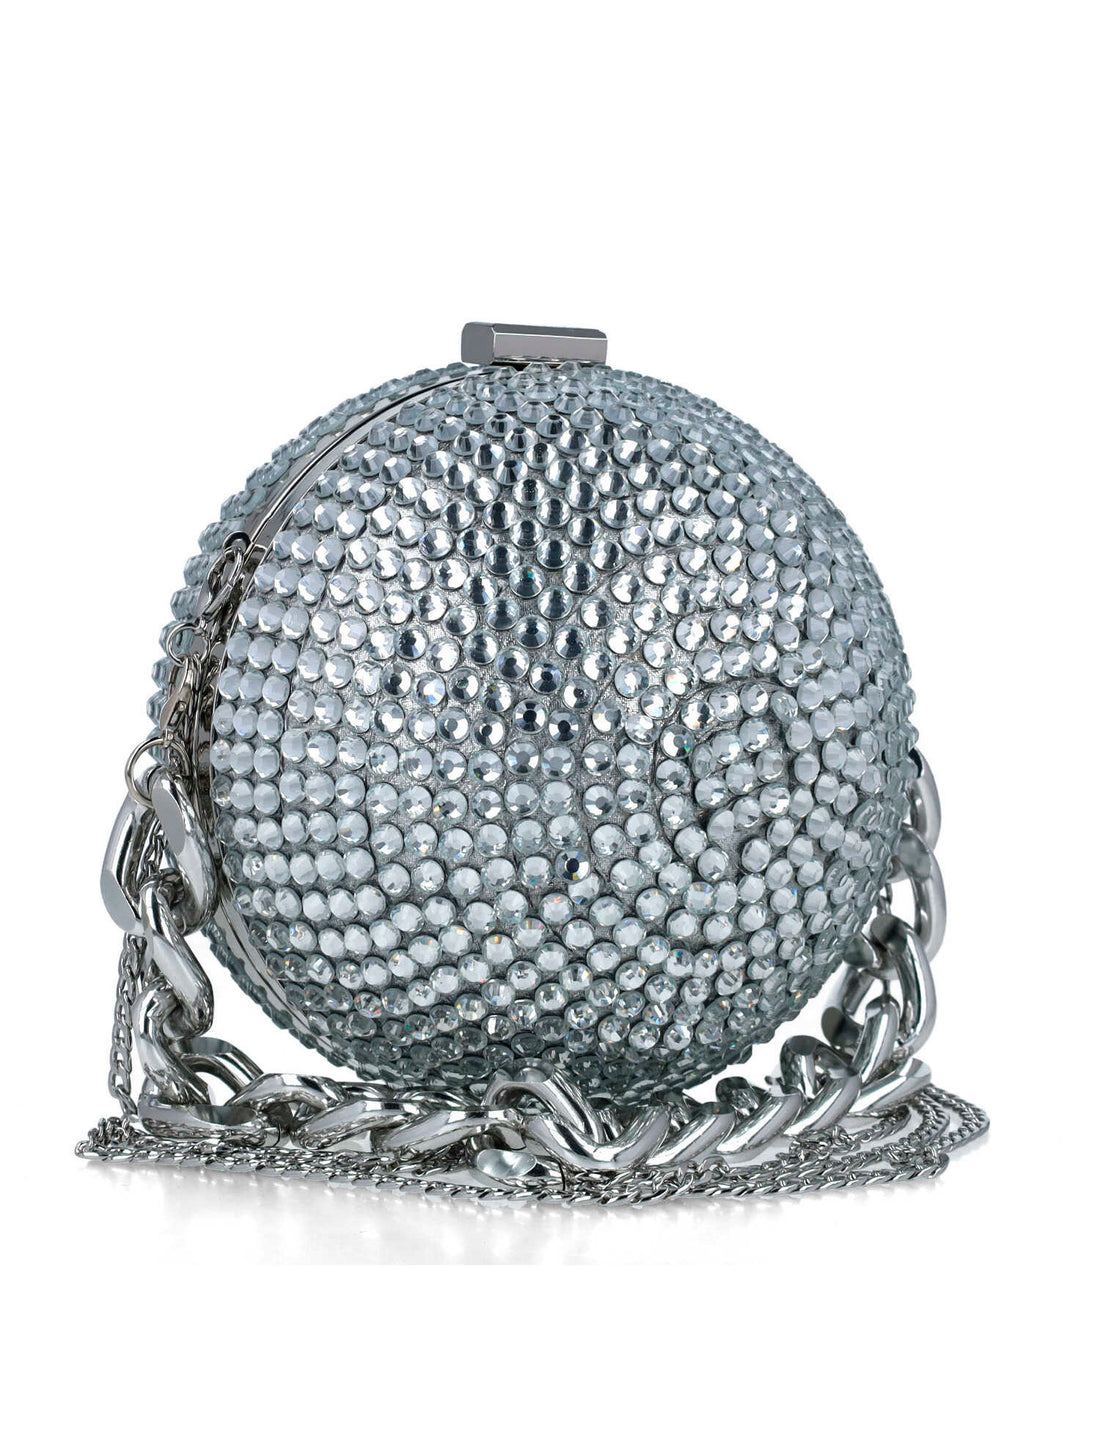 Round Clutch With Over Embellishment And Chain Strap_85670_09_02